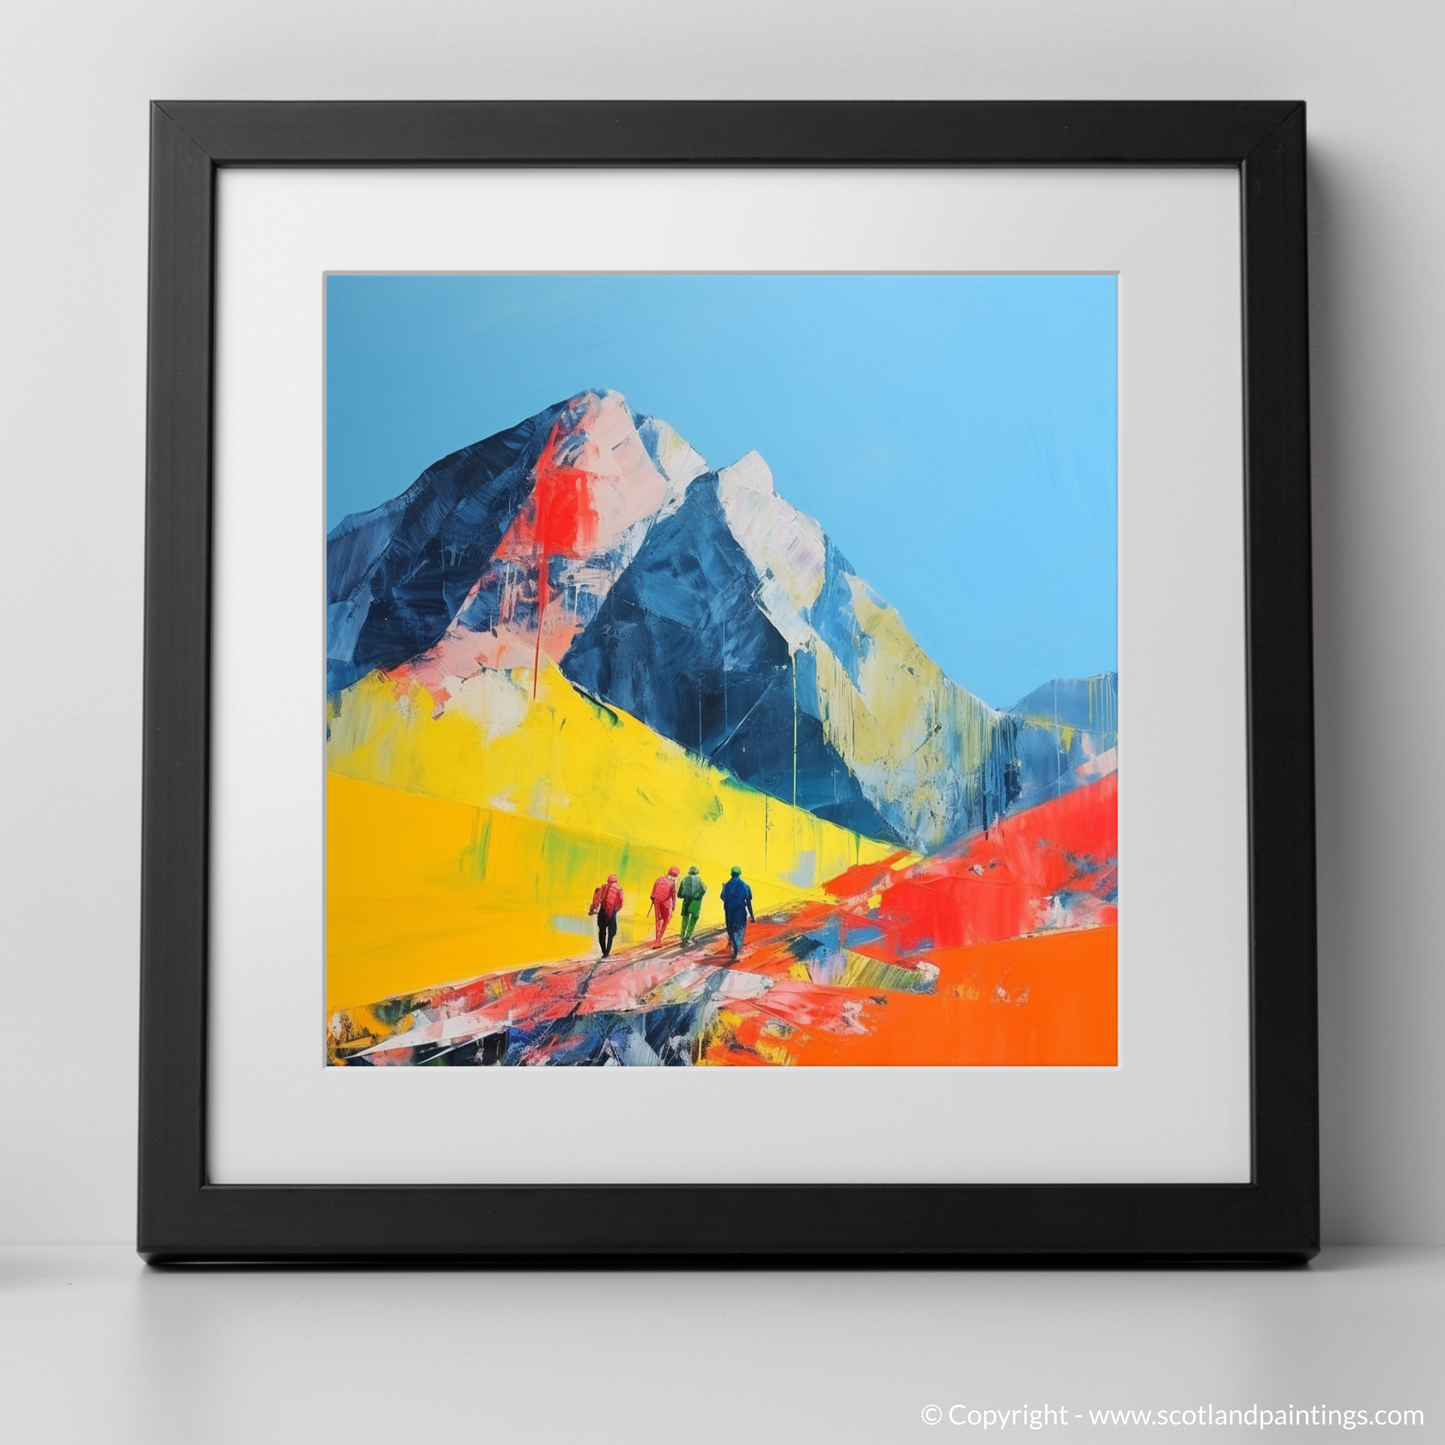 Painting and Art Print of Hikers in Glencoe. Hikers in Glencoe: A Minimalist Ode to Scotland's Wild Terrain.